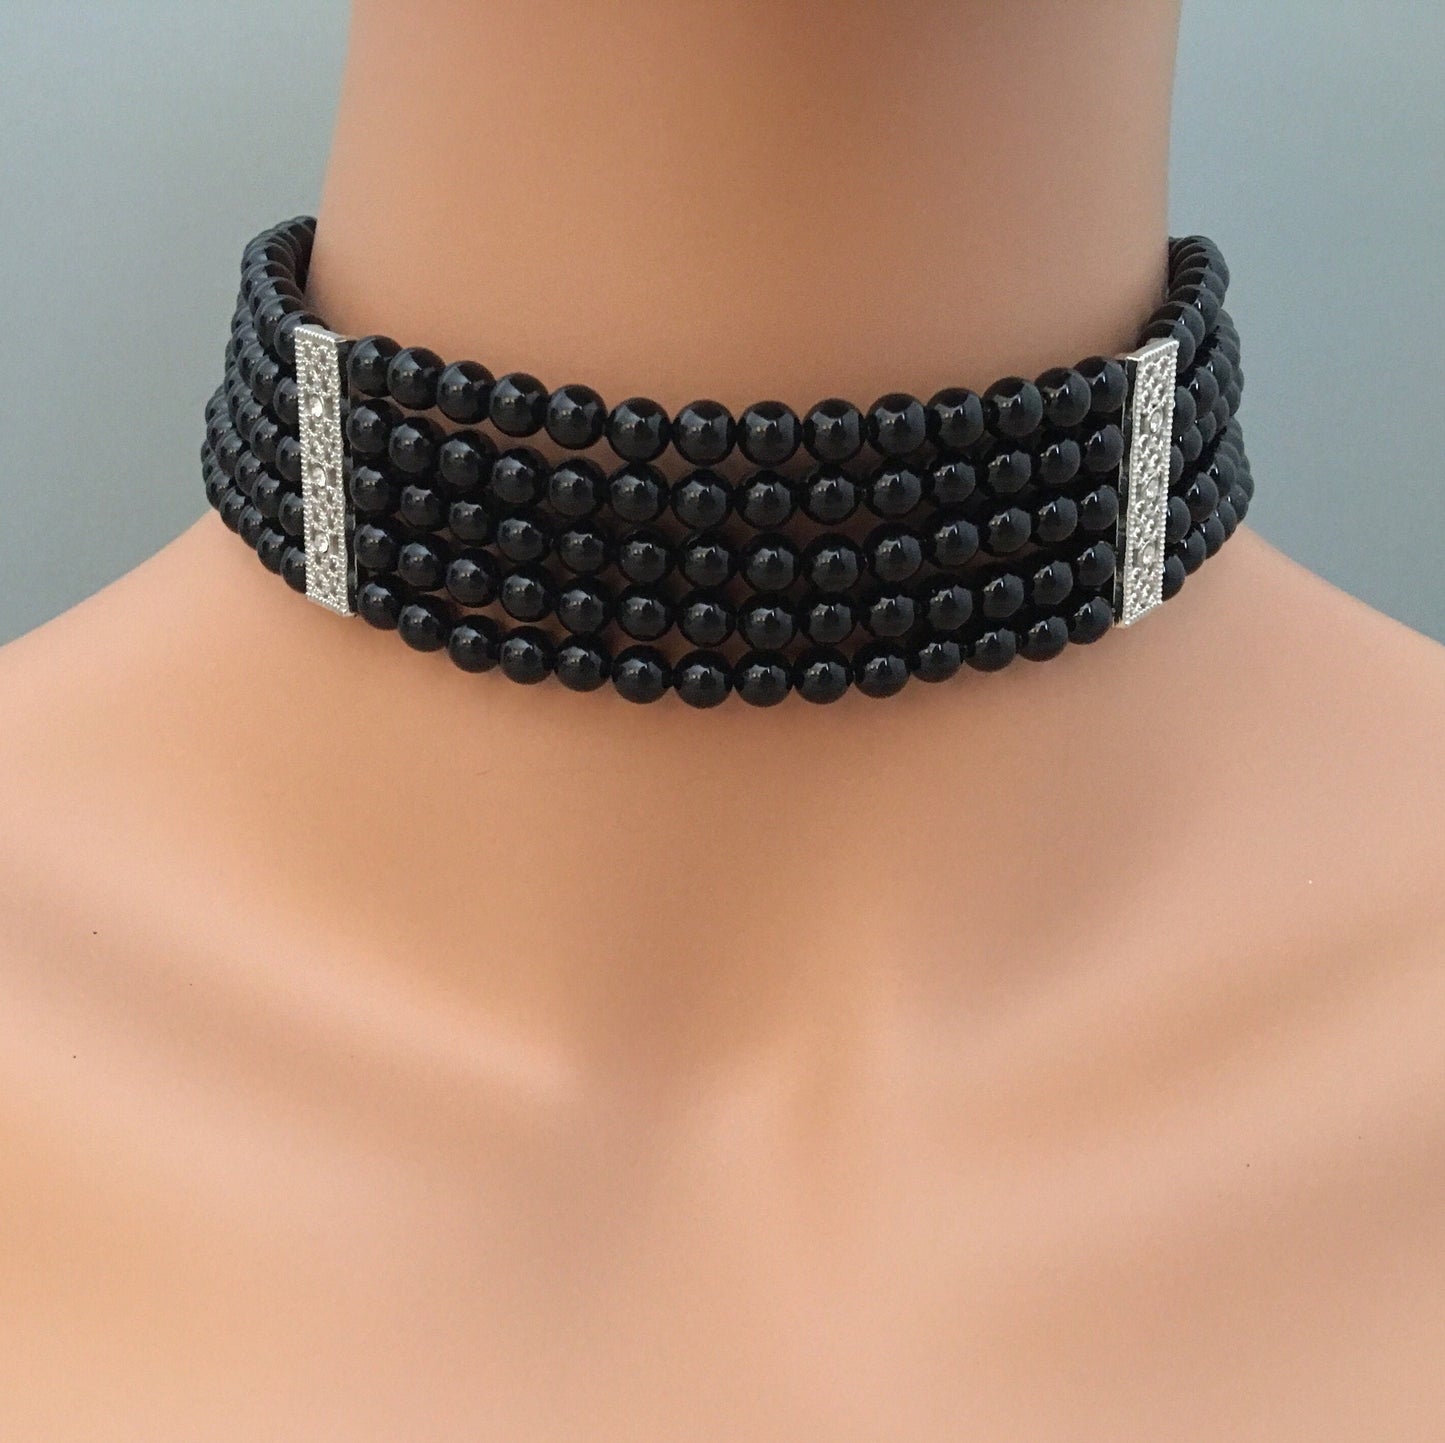 Black Pearl Choker Necklace 5 strands Swarovski Pearls in Mystic Black or your choice of color Goth Great Gatsby Art Deco flapper